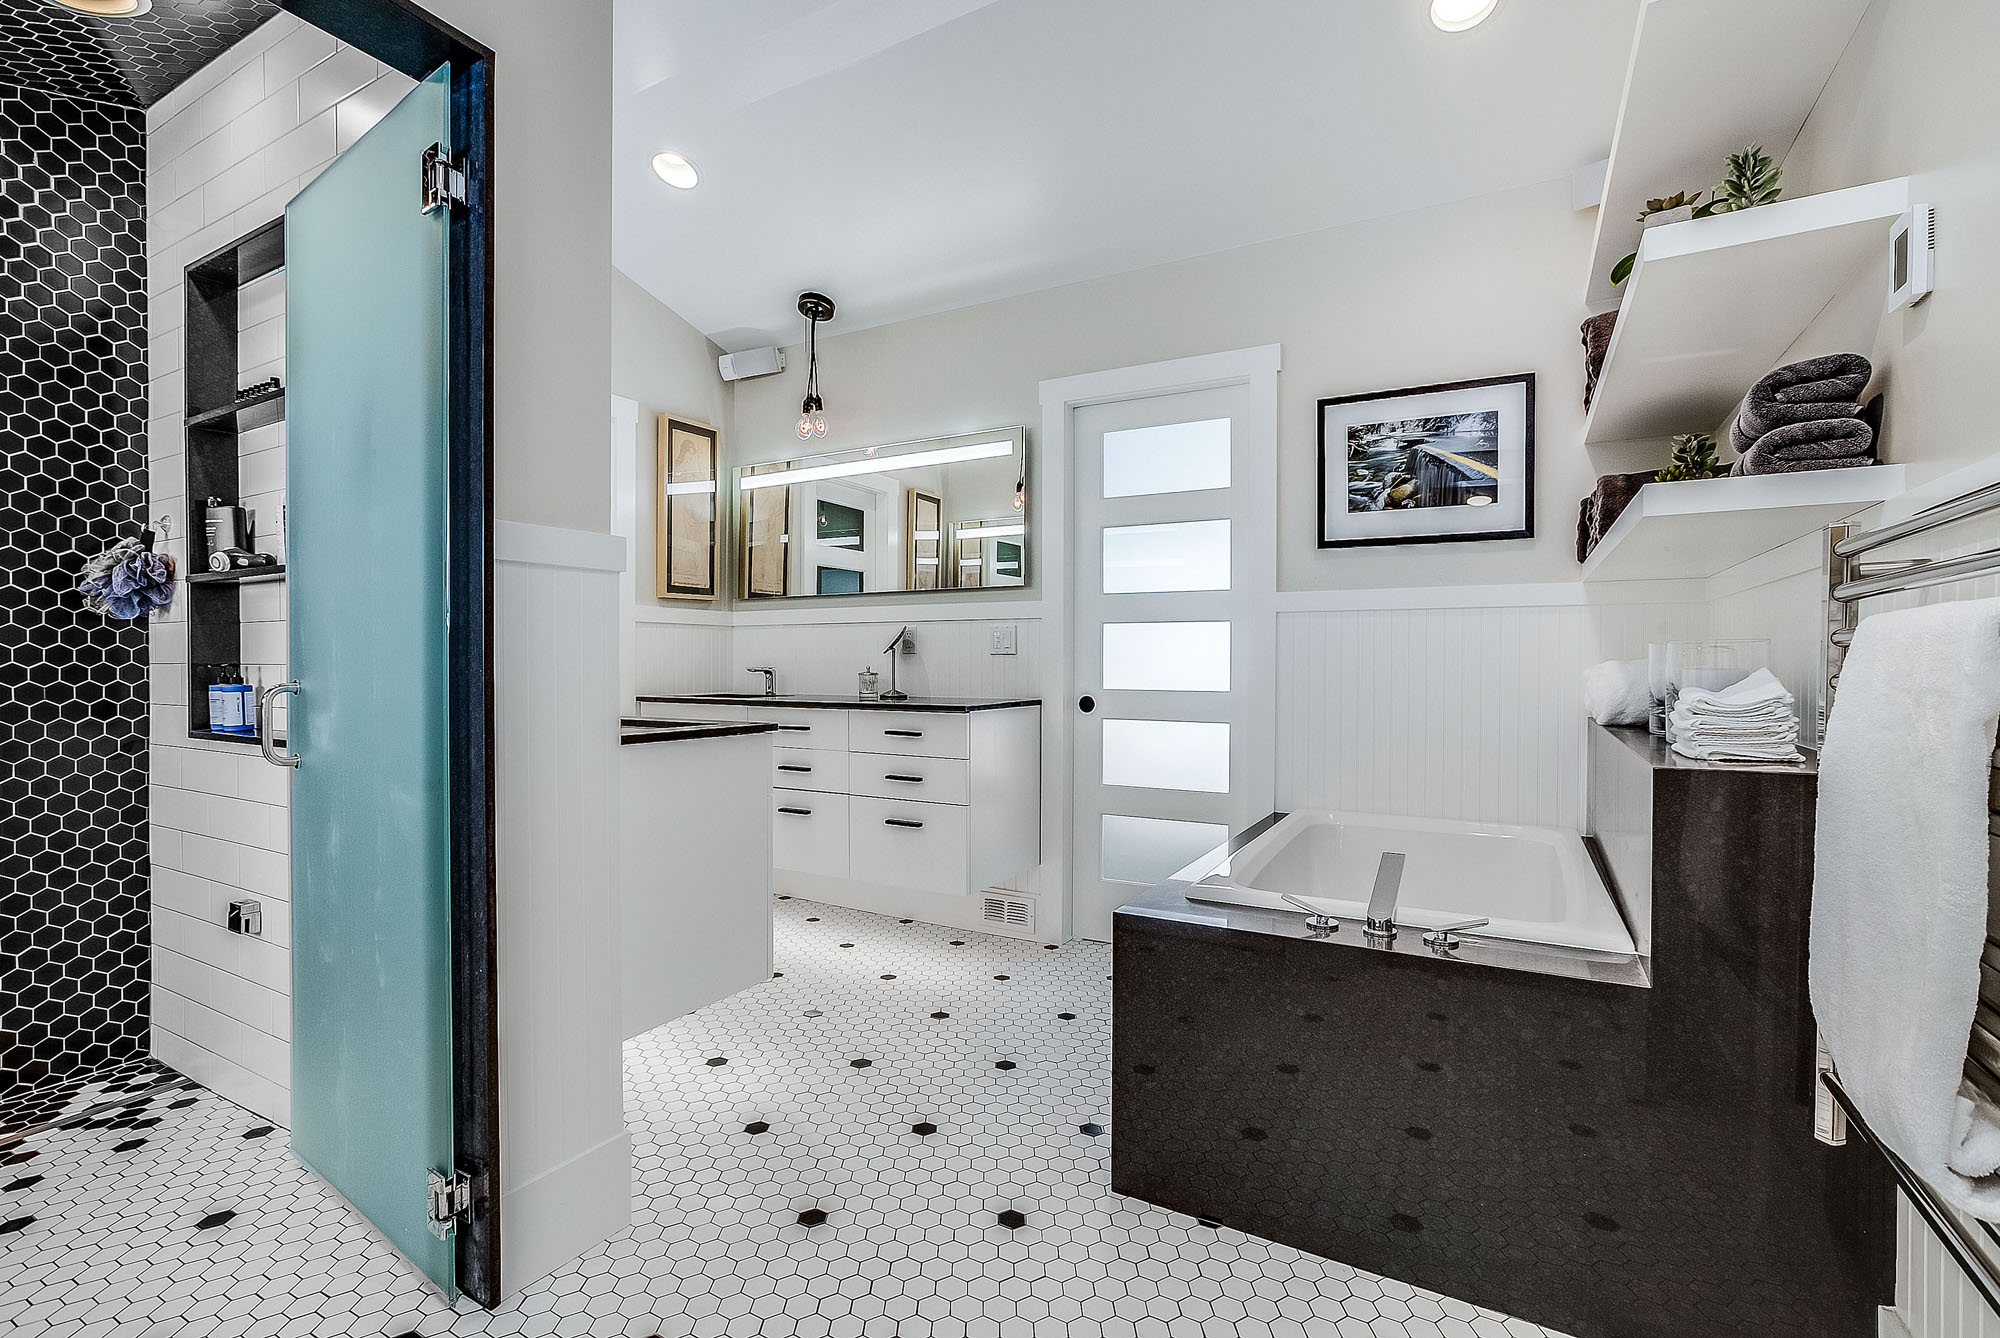 Seventh slide - Black and white master bathroom with tub, vanity and shower room